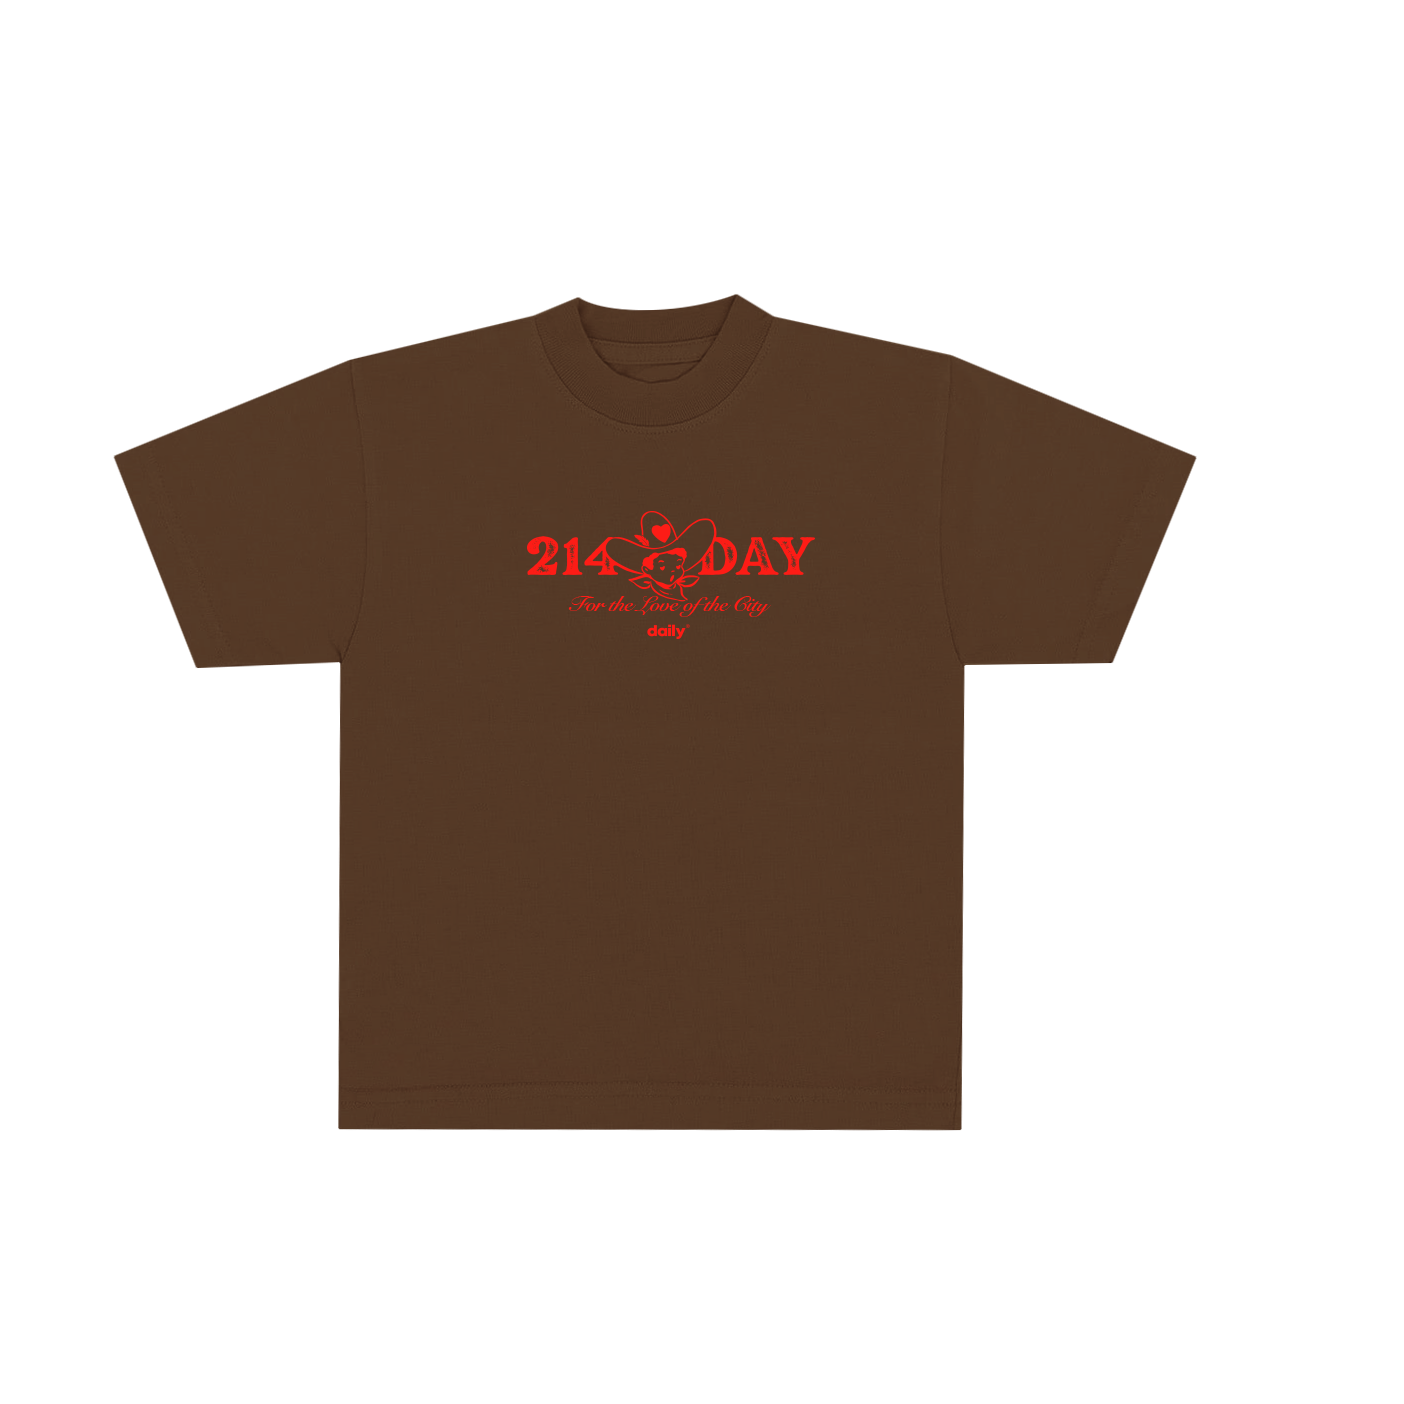 Daily 214DAY Tee Brown